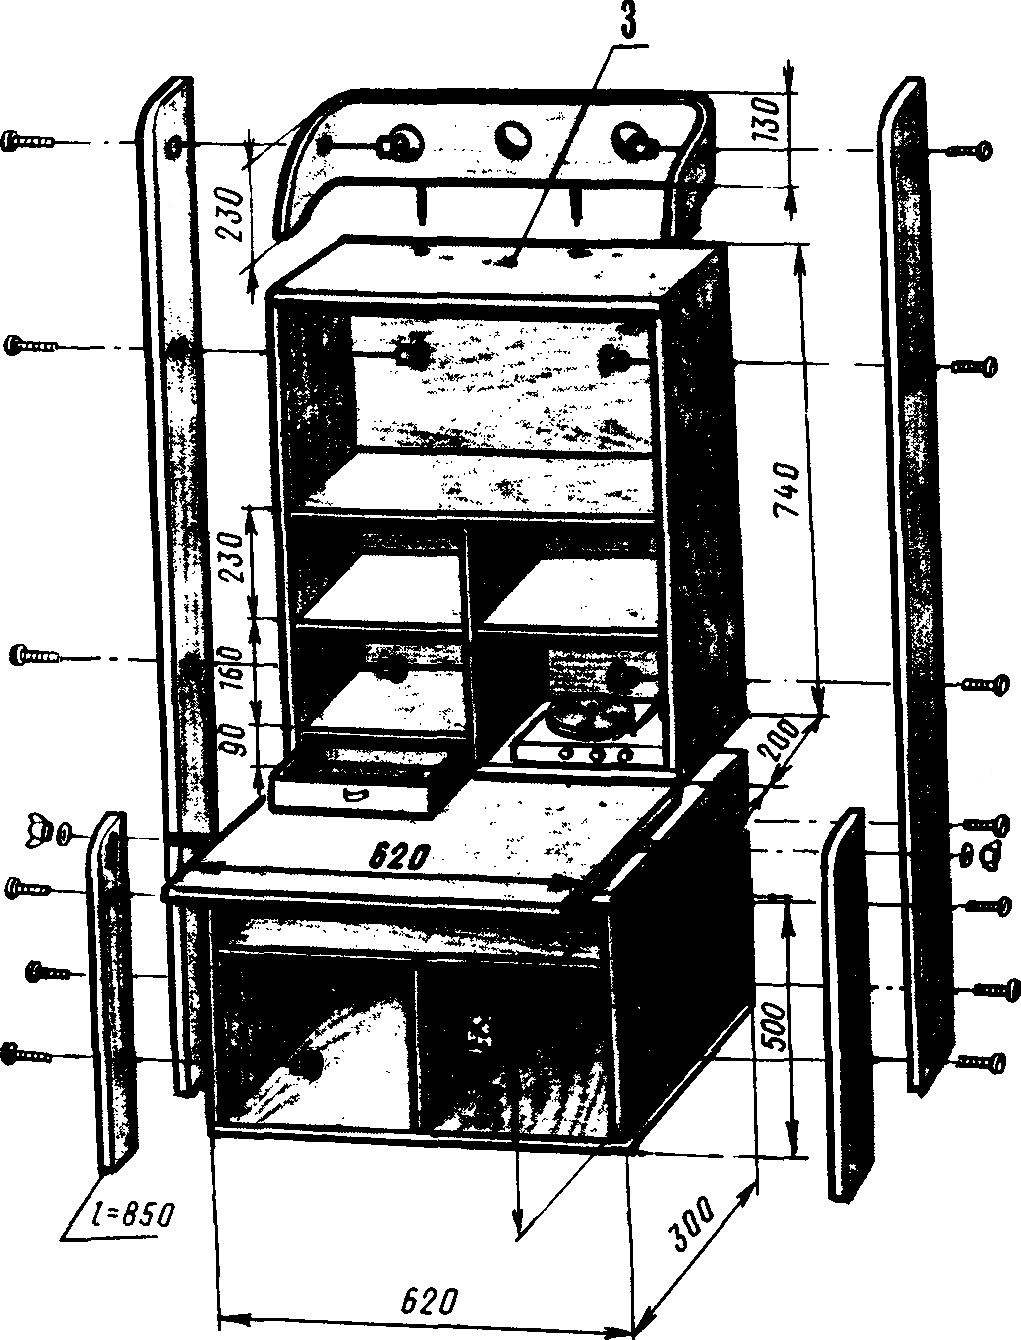 Two-story baby kit (Assembly diagram).